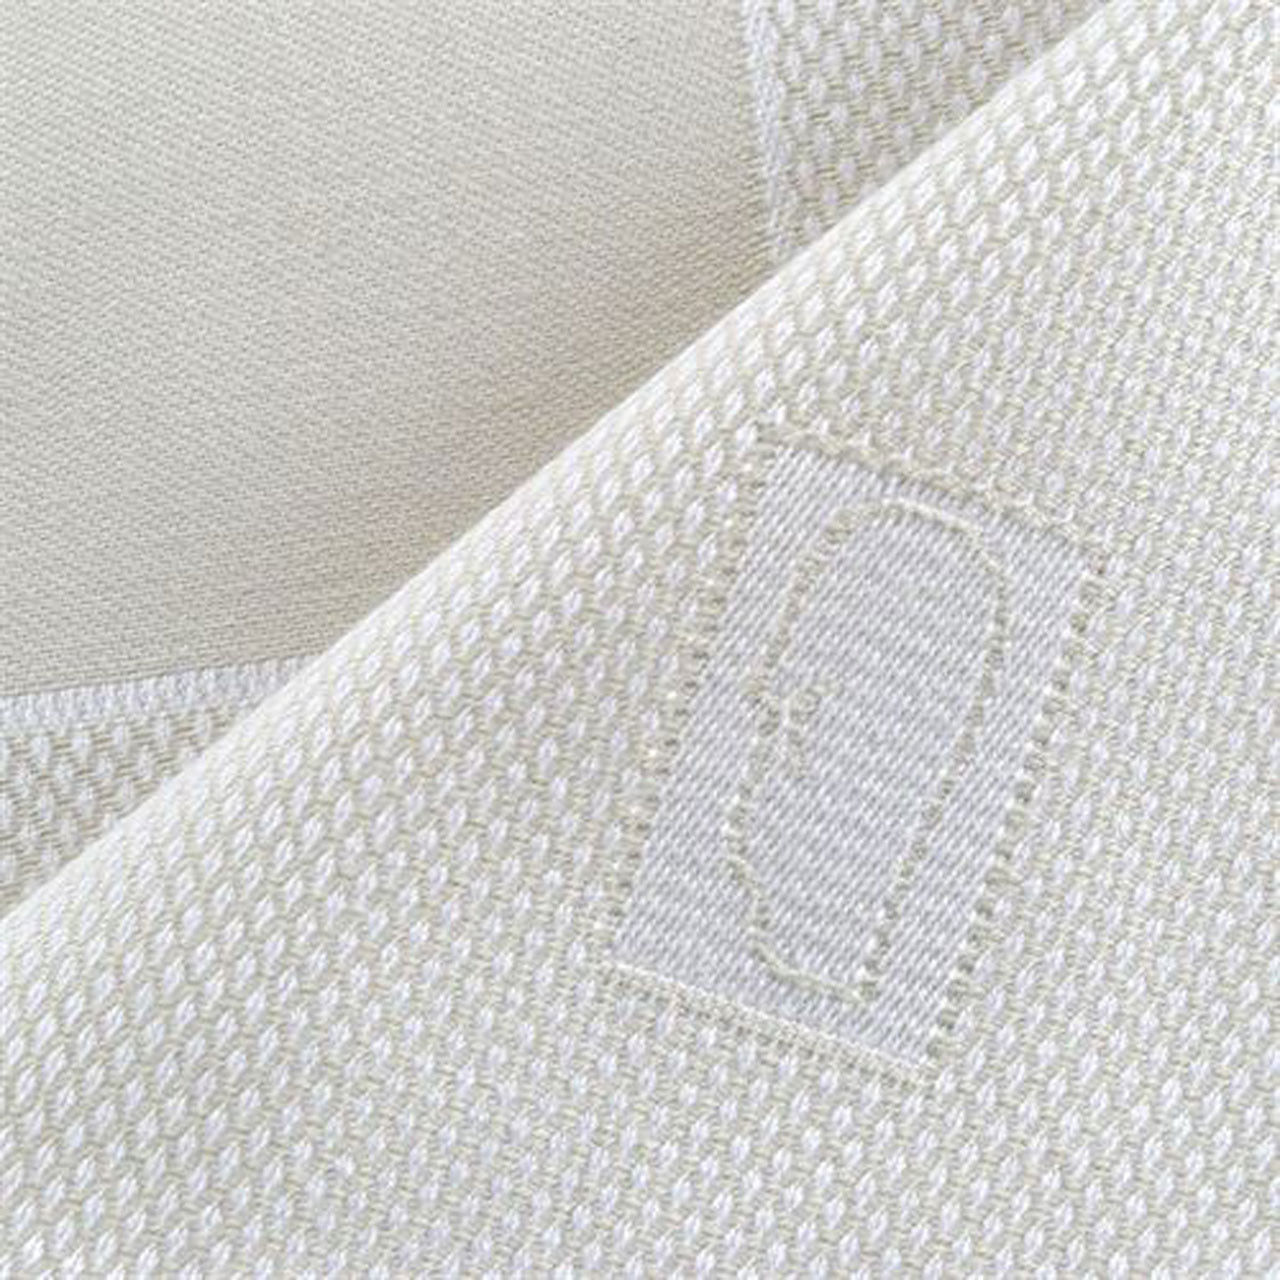 22x22 DIRONA Pique Bordered White Napkins Questions & Answers